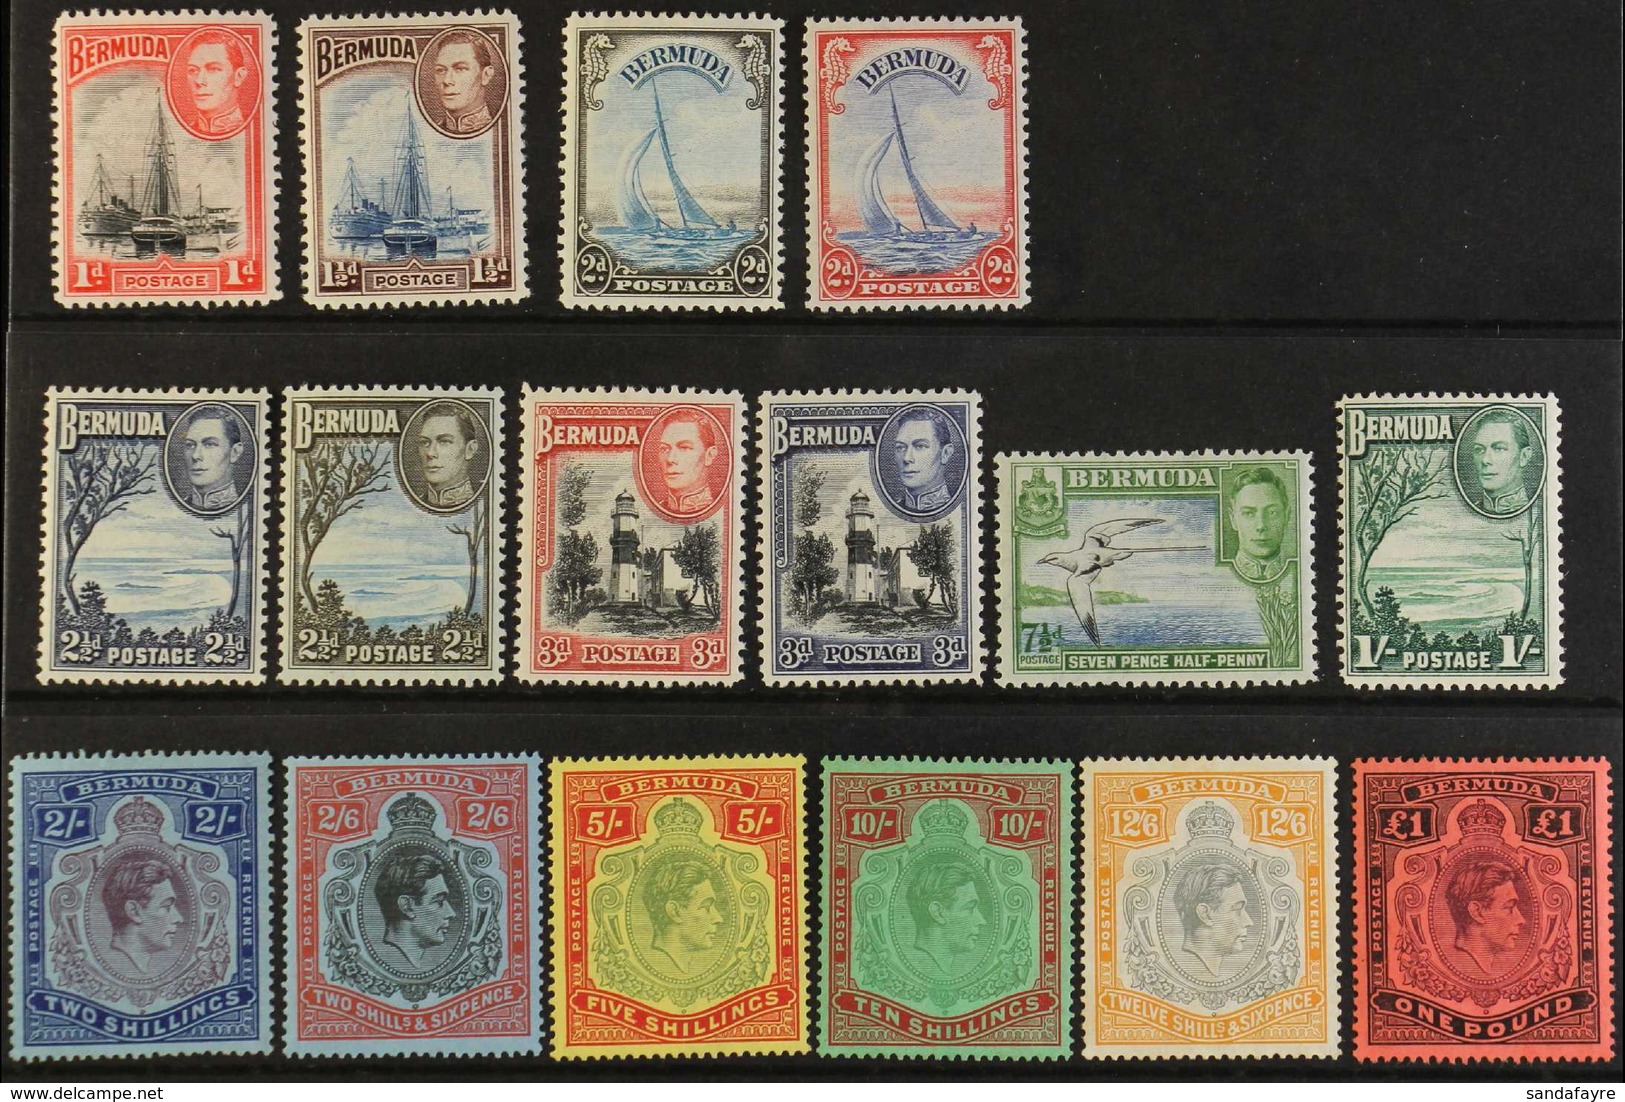 1938-52  Definitive Set, SG 110/21b, All Key Plate Values Are Perf 14, Very Fine Mint (16 Stamps) For More Images, Pleas - Bermuda